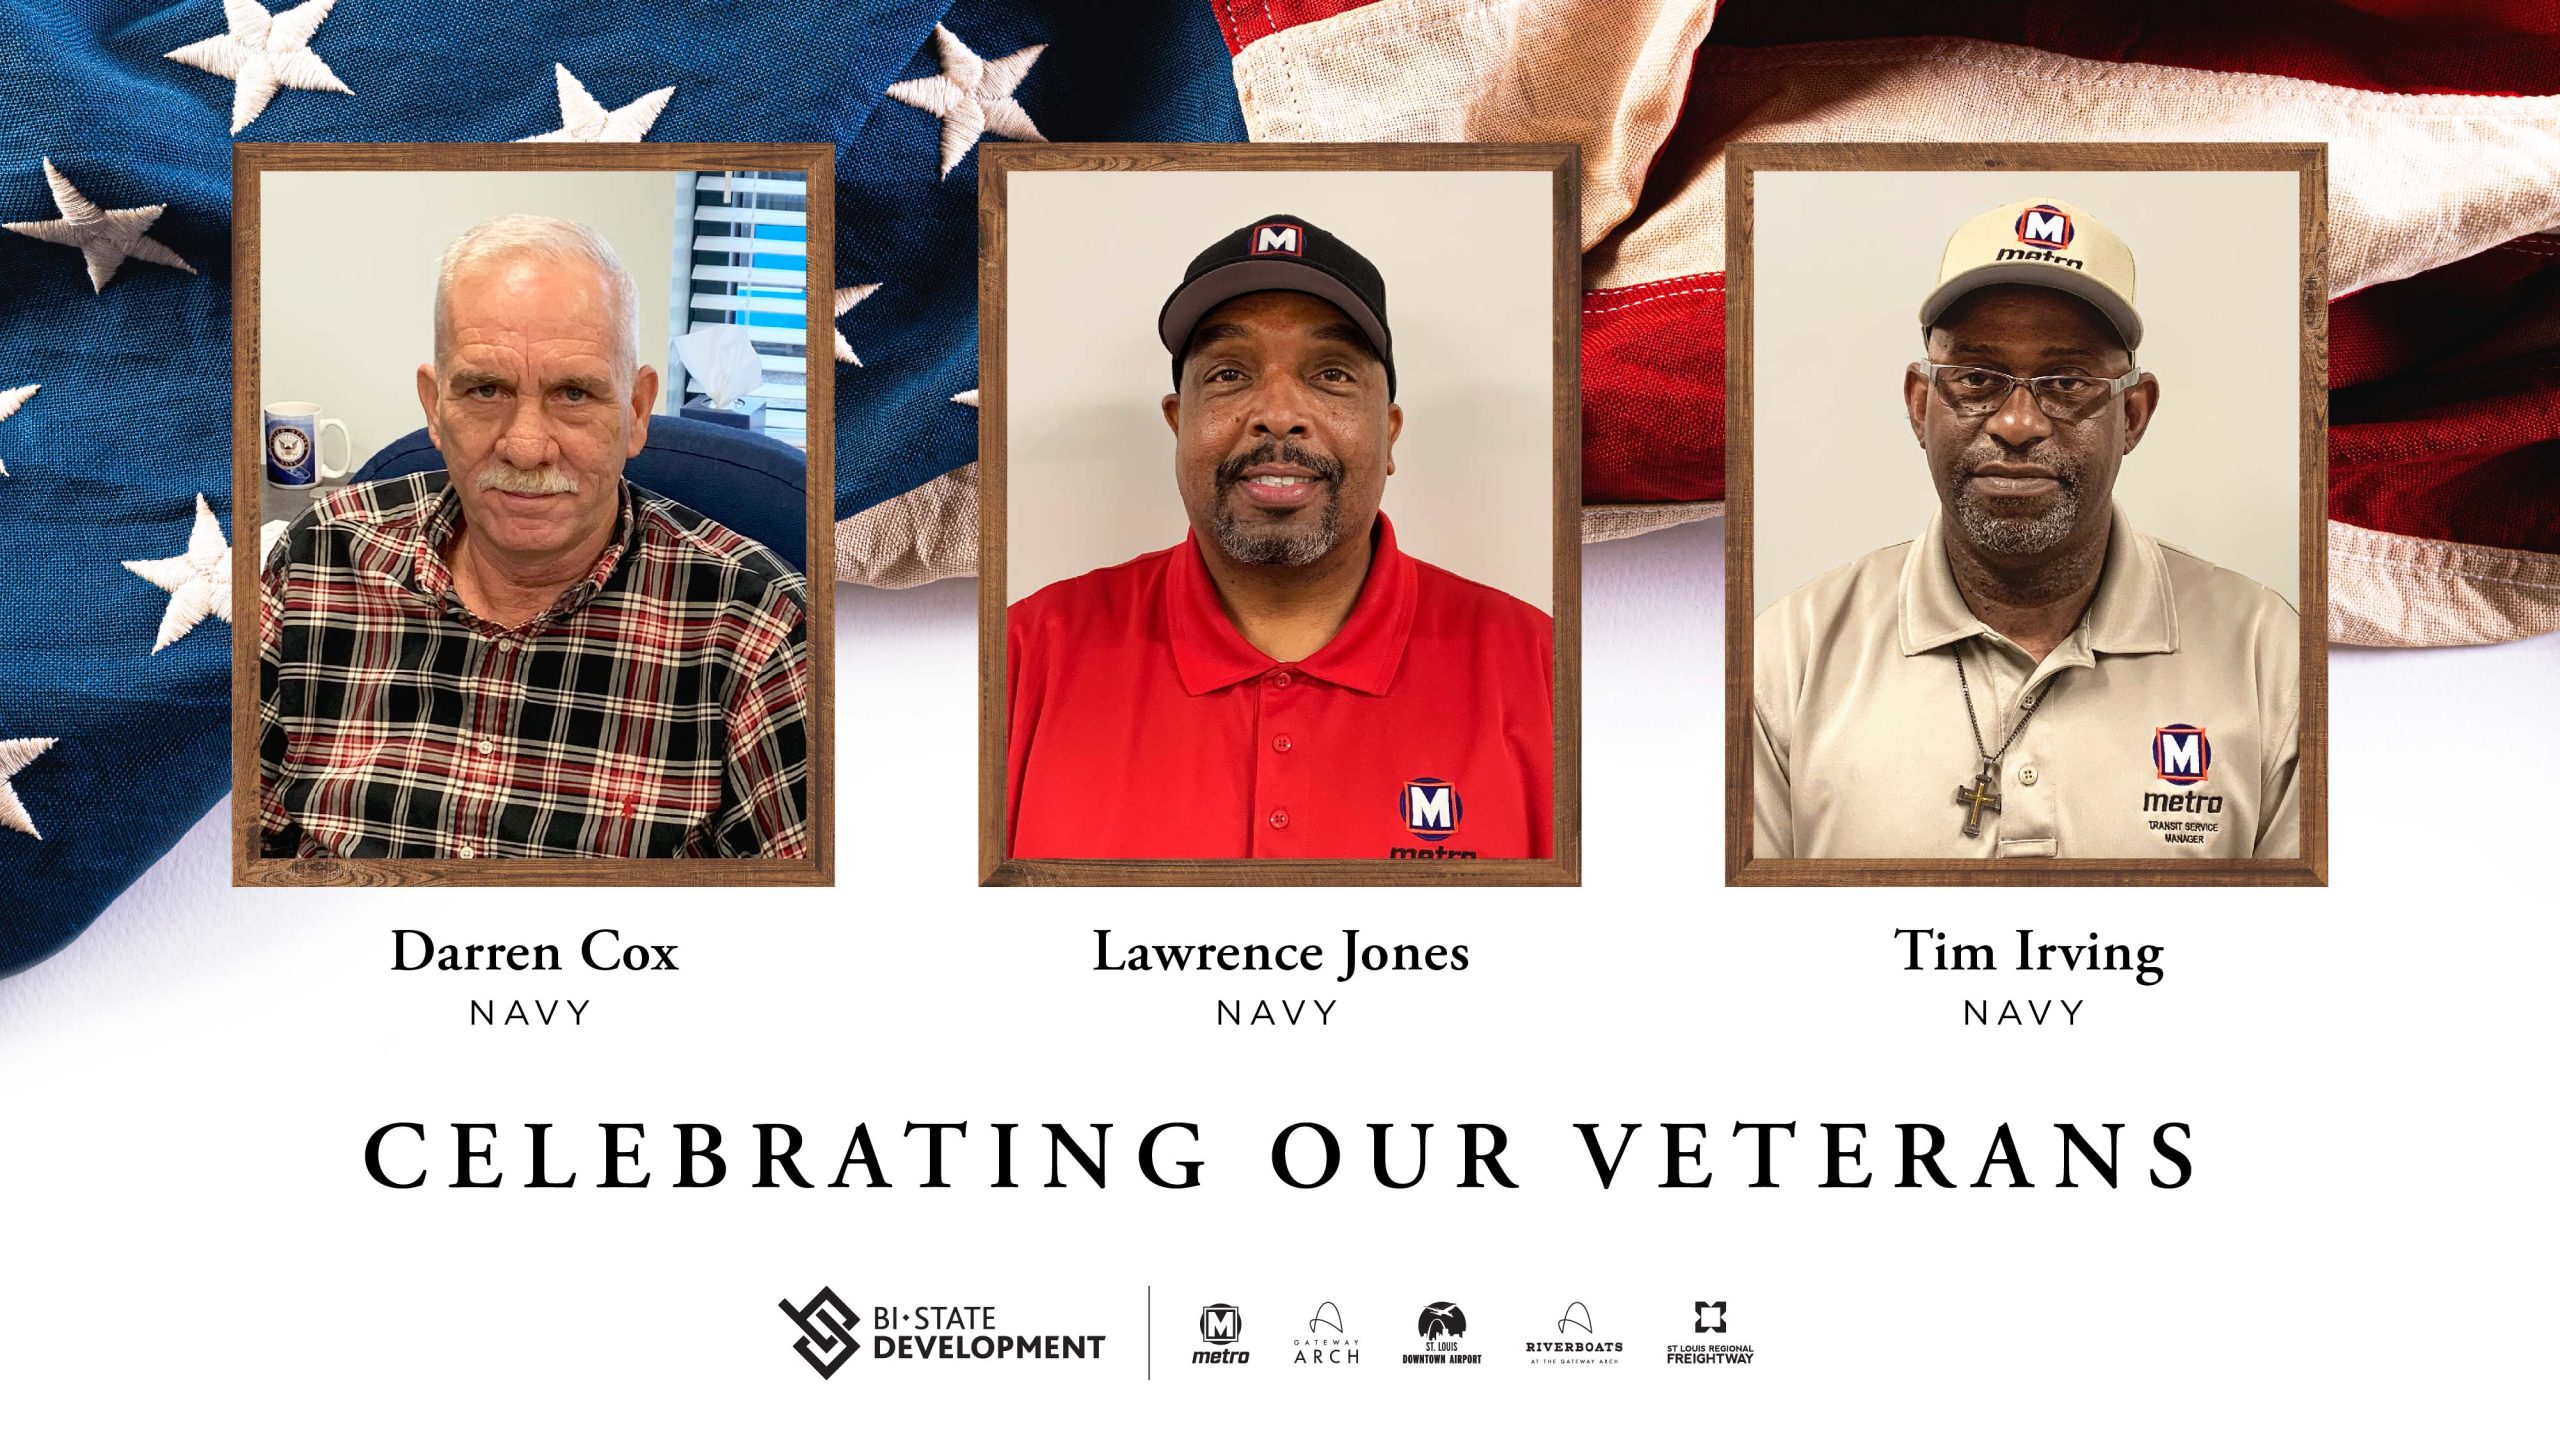 A Celebrating Our Veterans graphic that features three Navy Veterans: Darren Curry, Lawrence Jones. and Tim Irving.